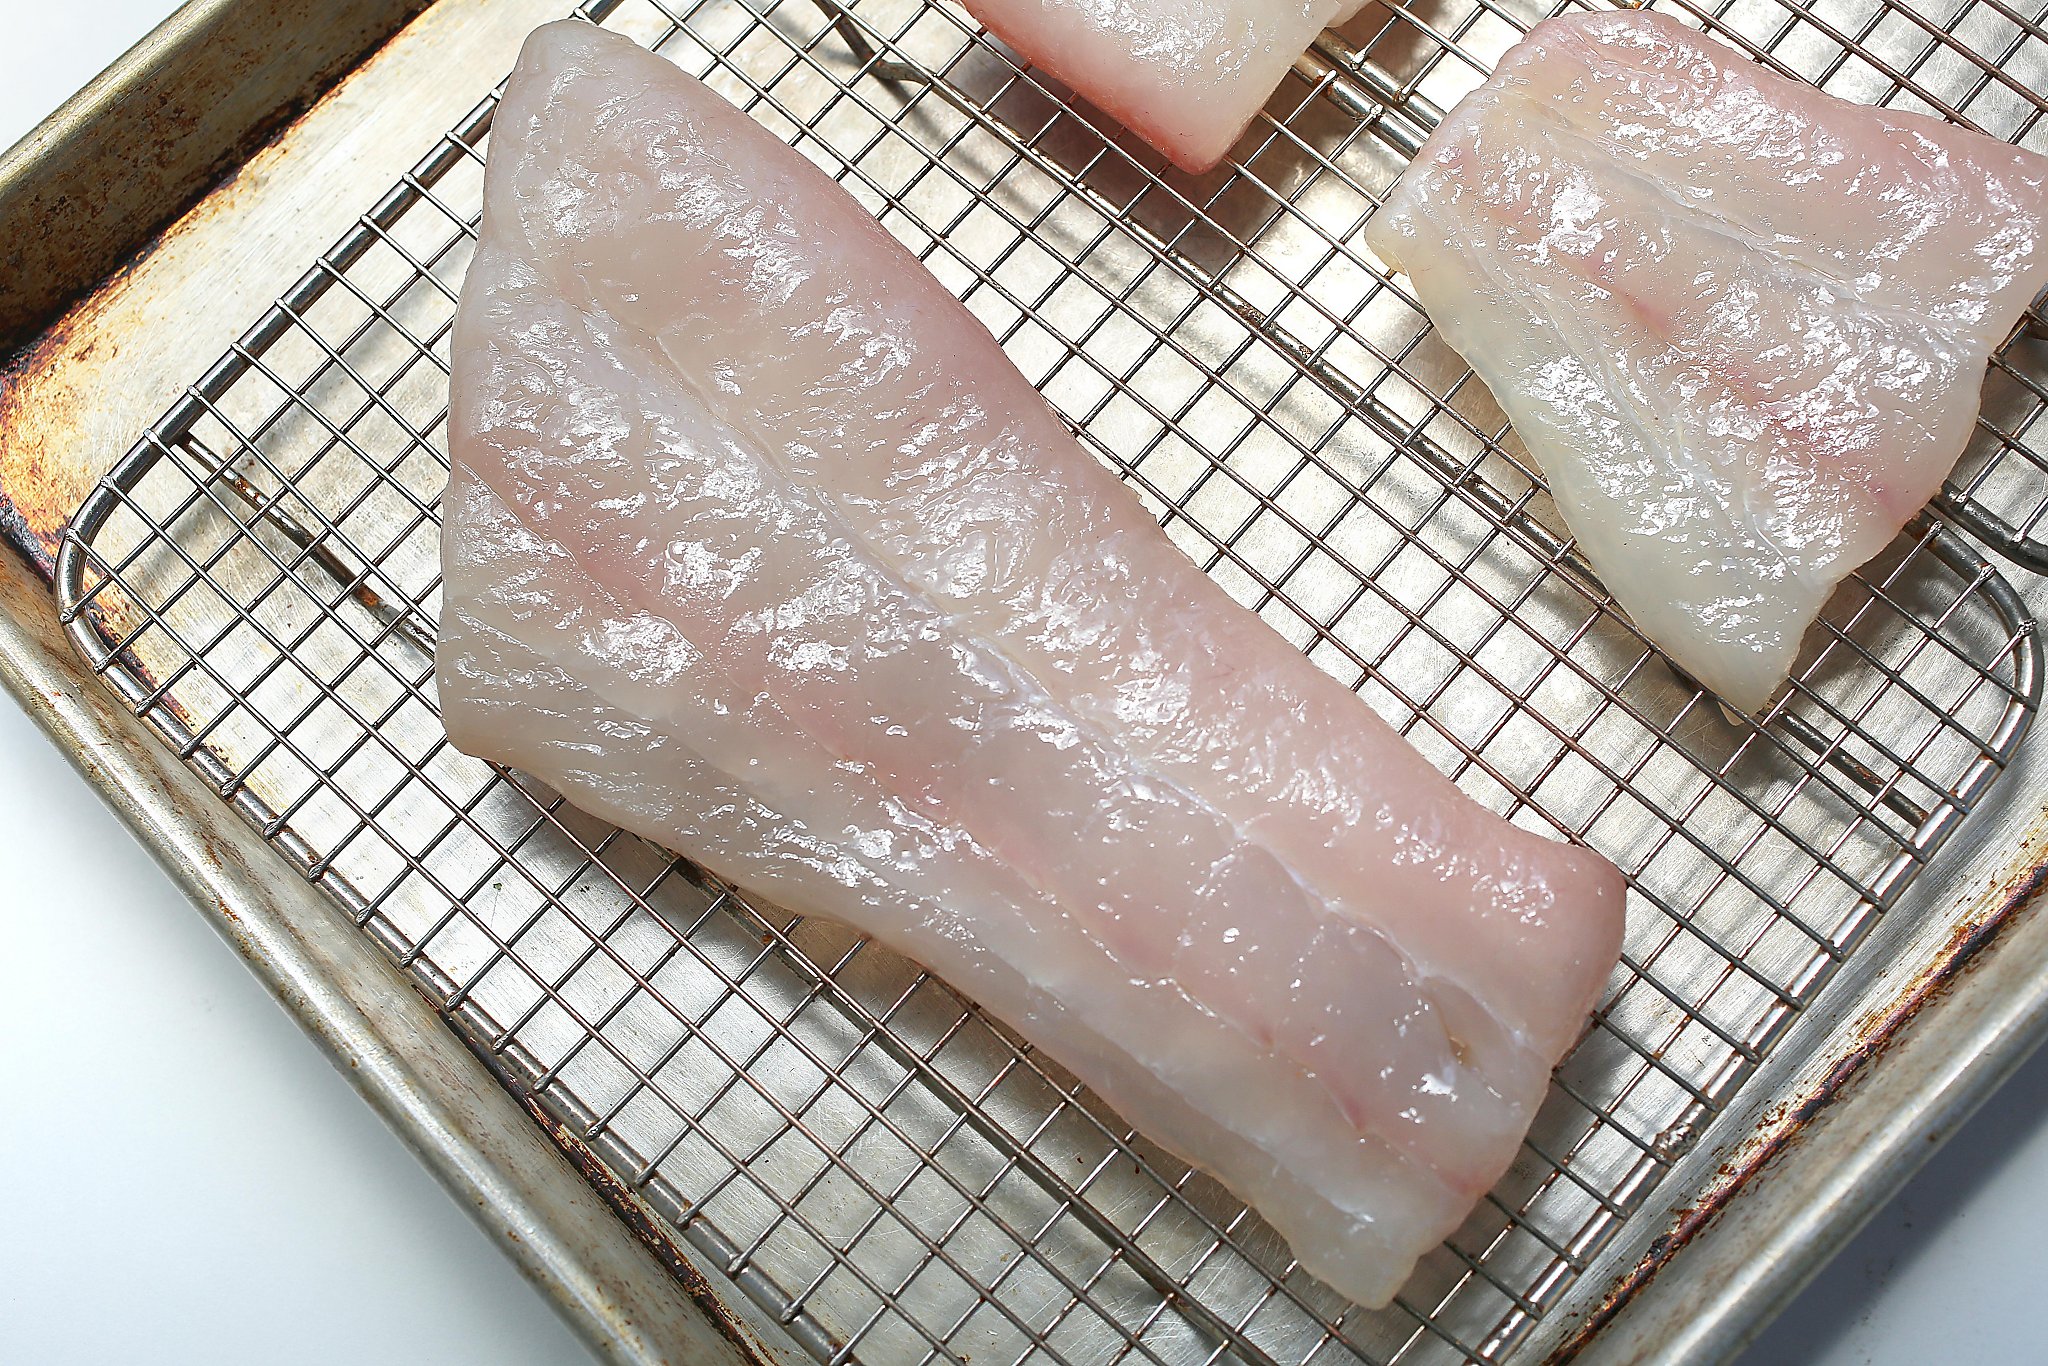 How to cook local halibut